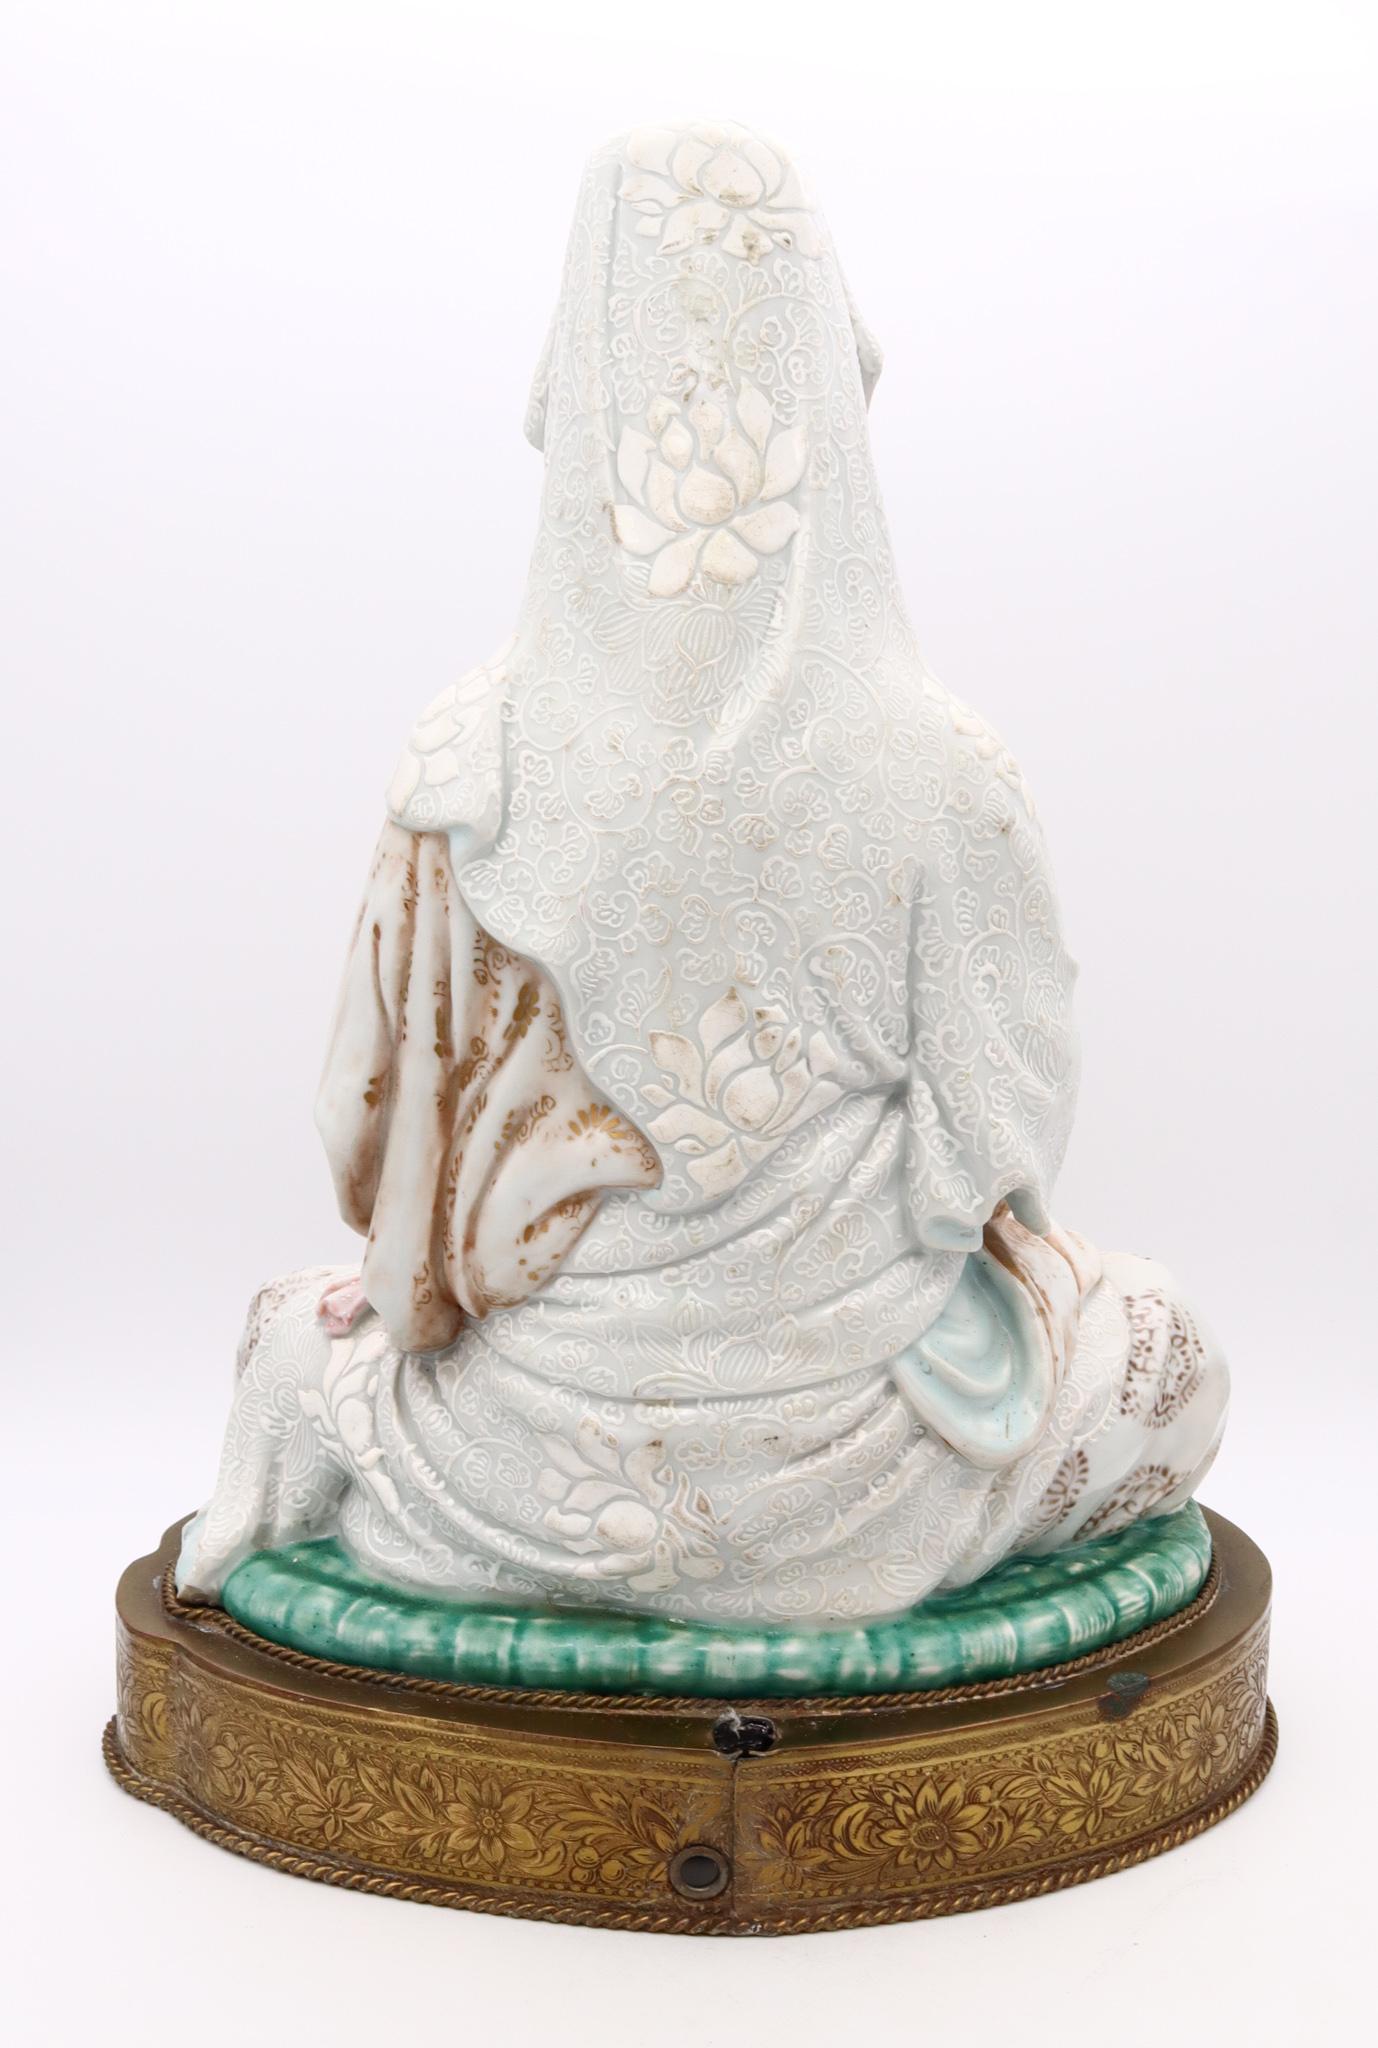 Japanese Japan 1890 Meiji Period Seated Figure of Quan Yin in Enamelled White Porcelain